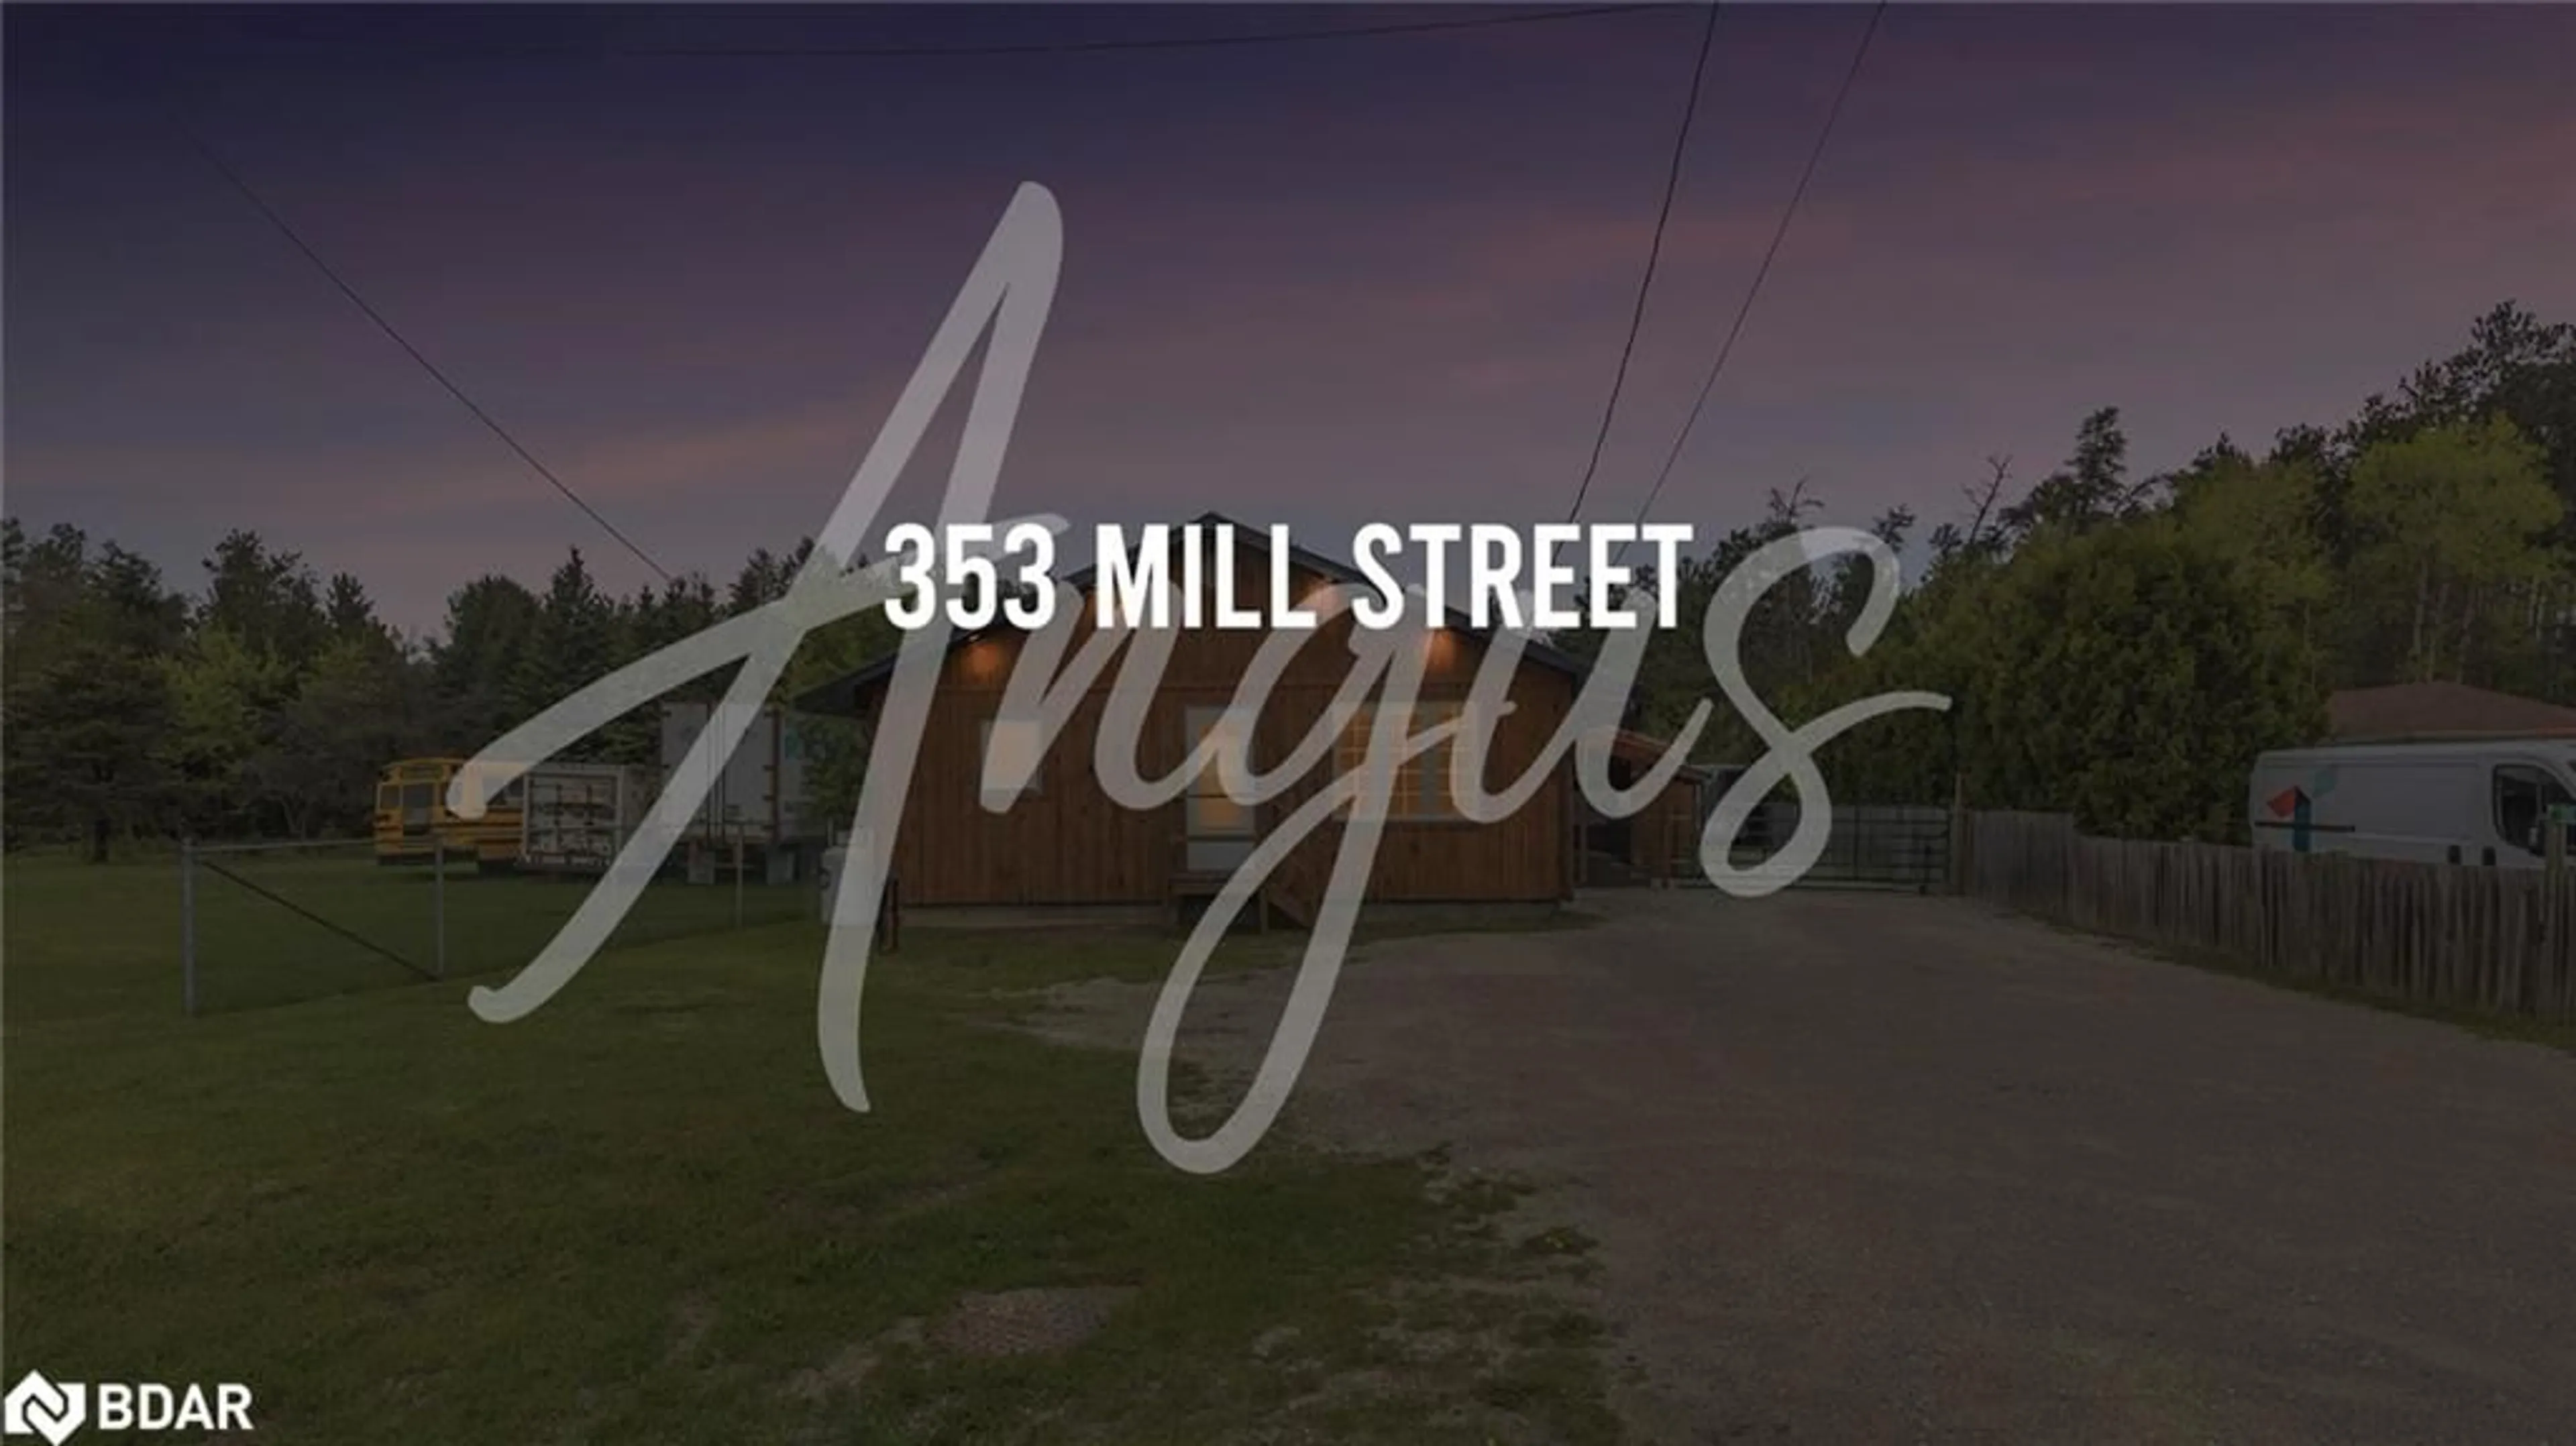 Street view for 353 Mill St, Angus Ontario L3W 0E2